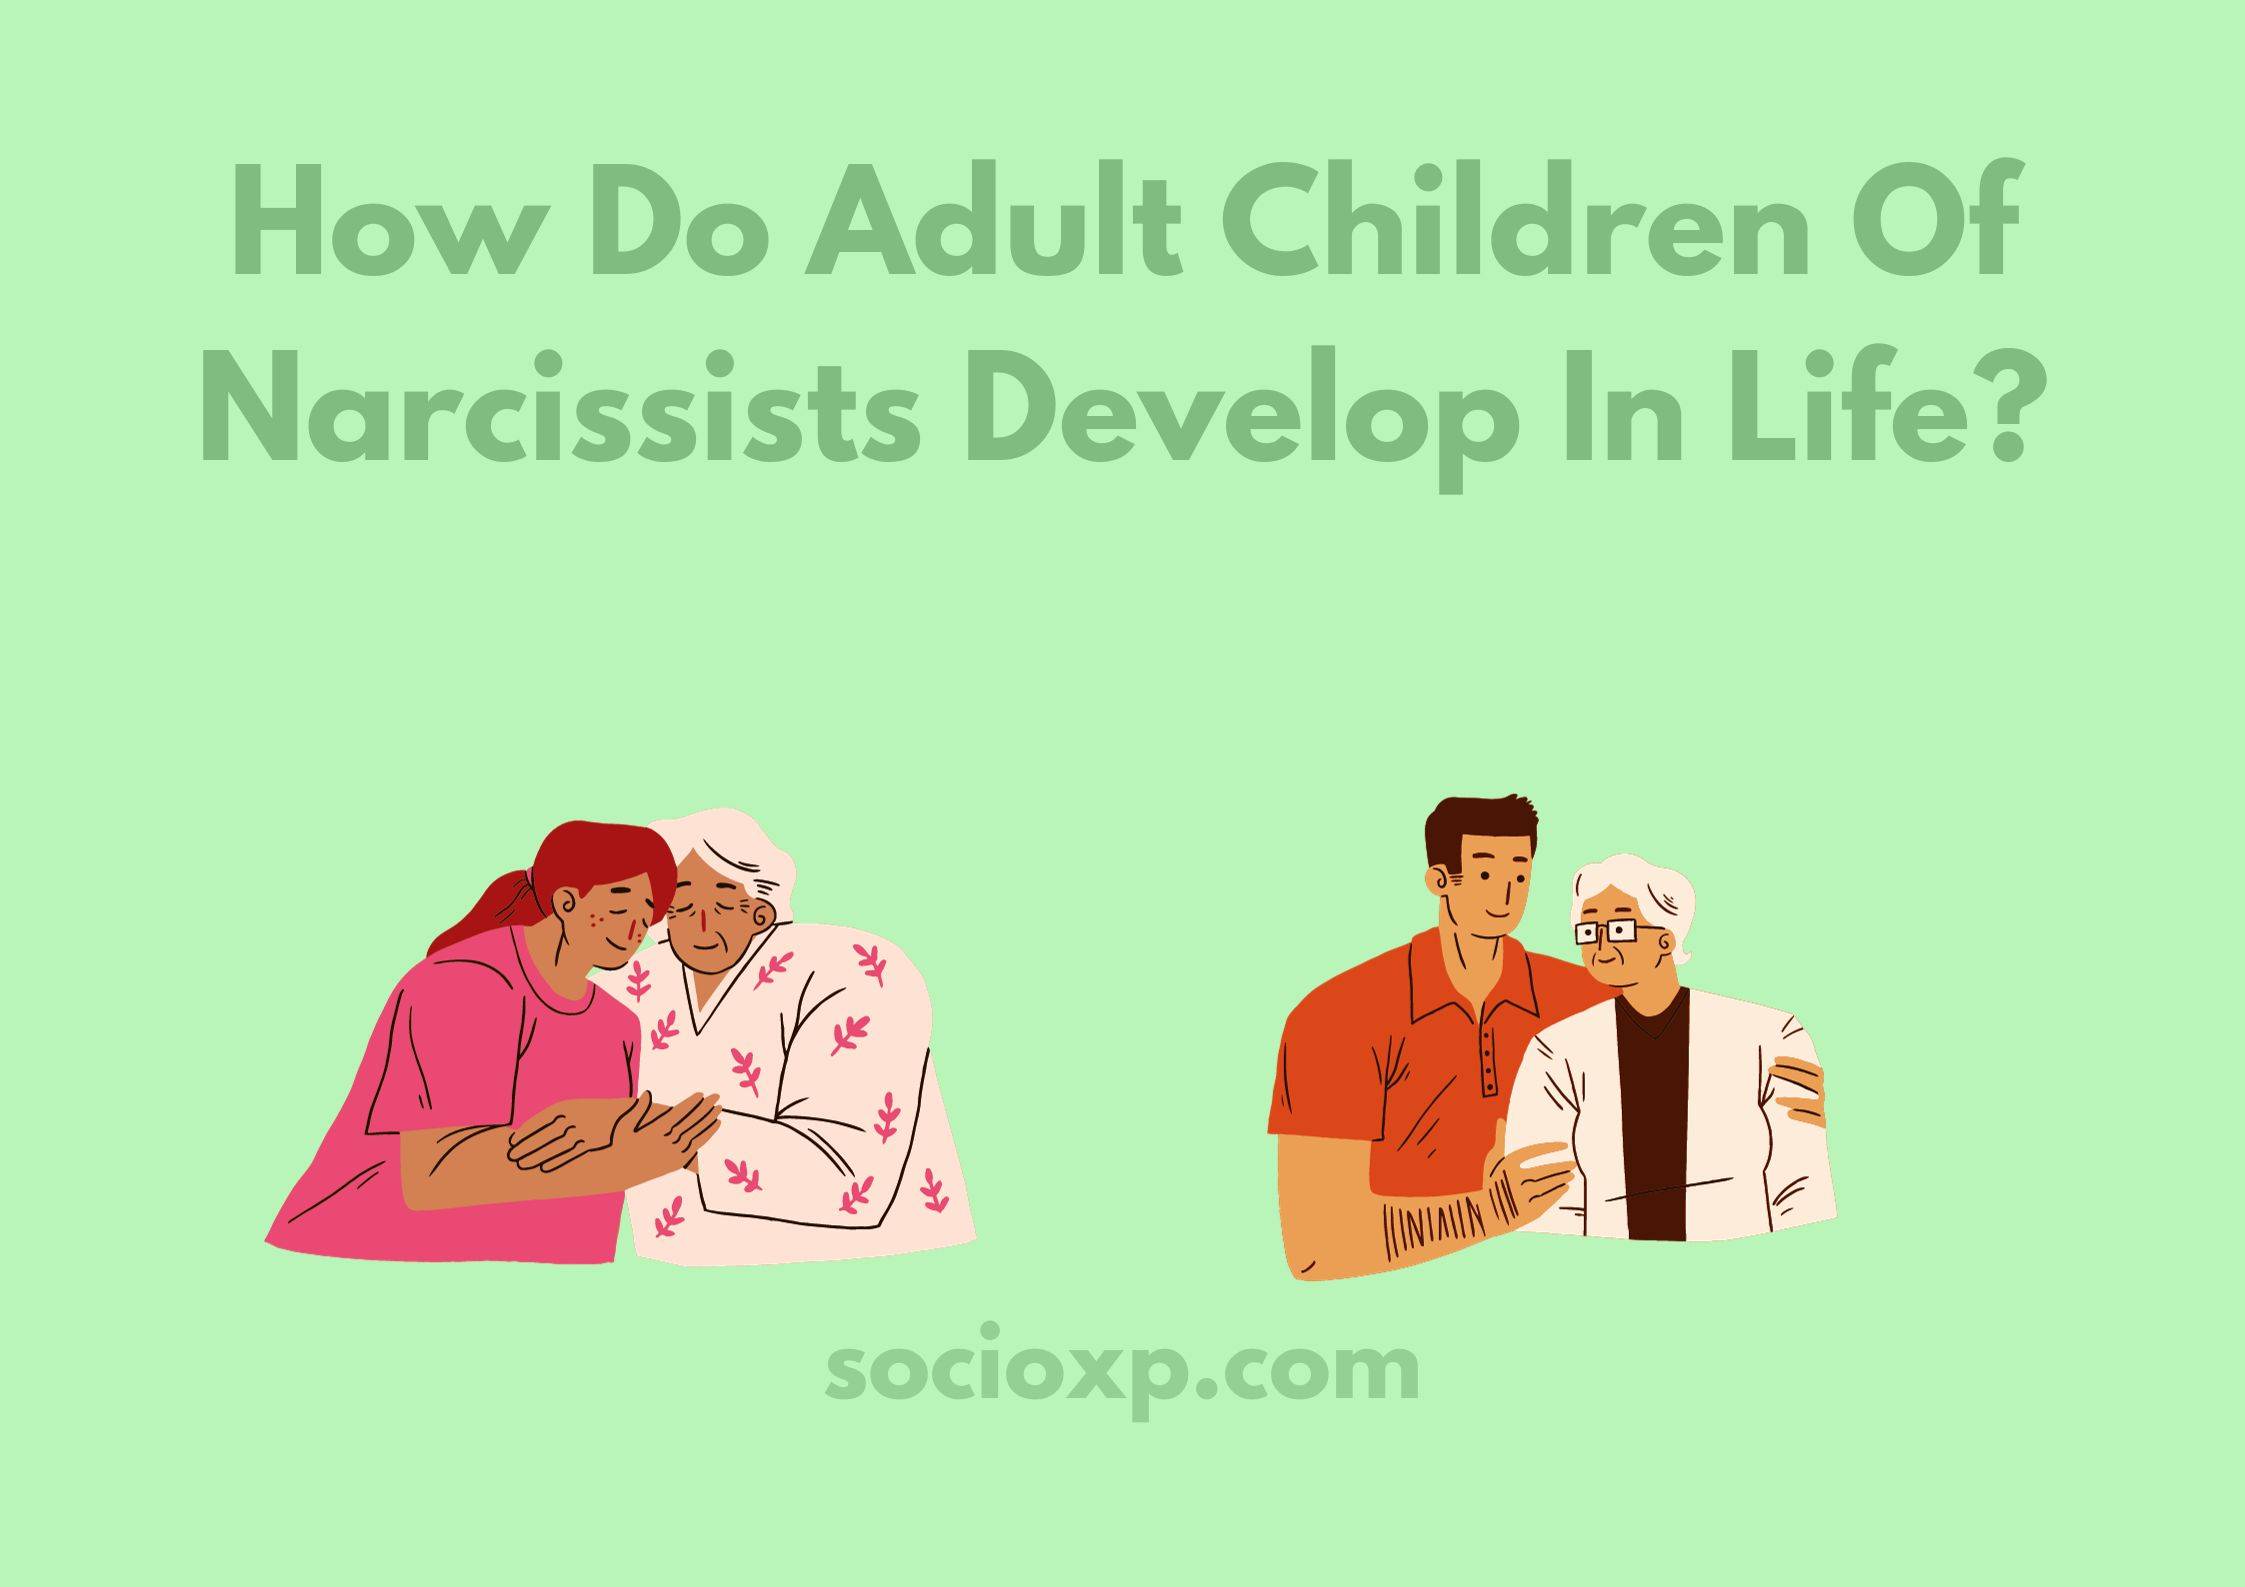 How Do Adult Children Of Narcissists Develop In Life?